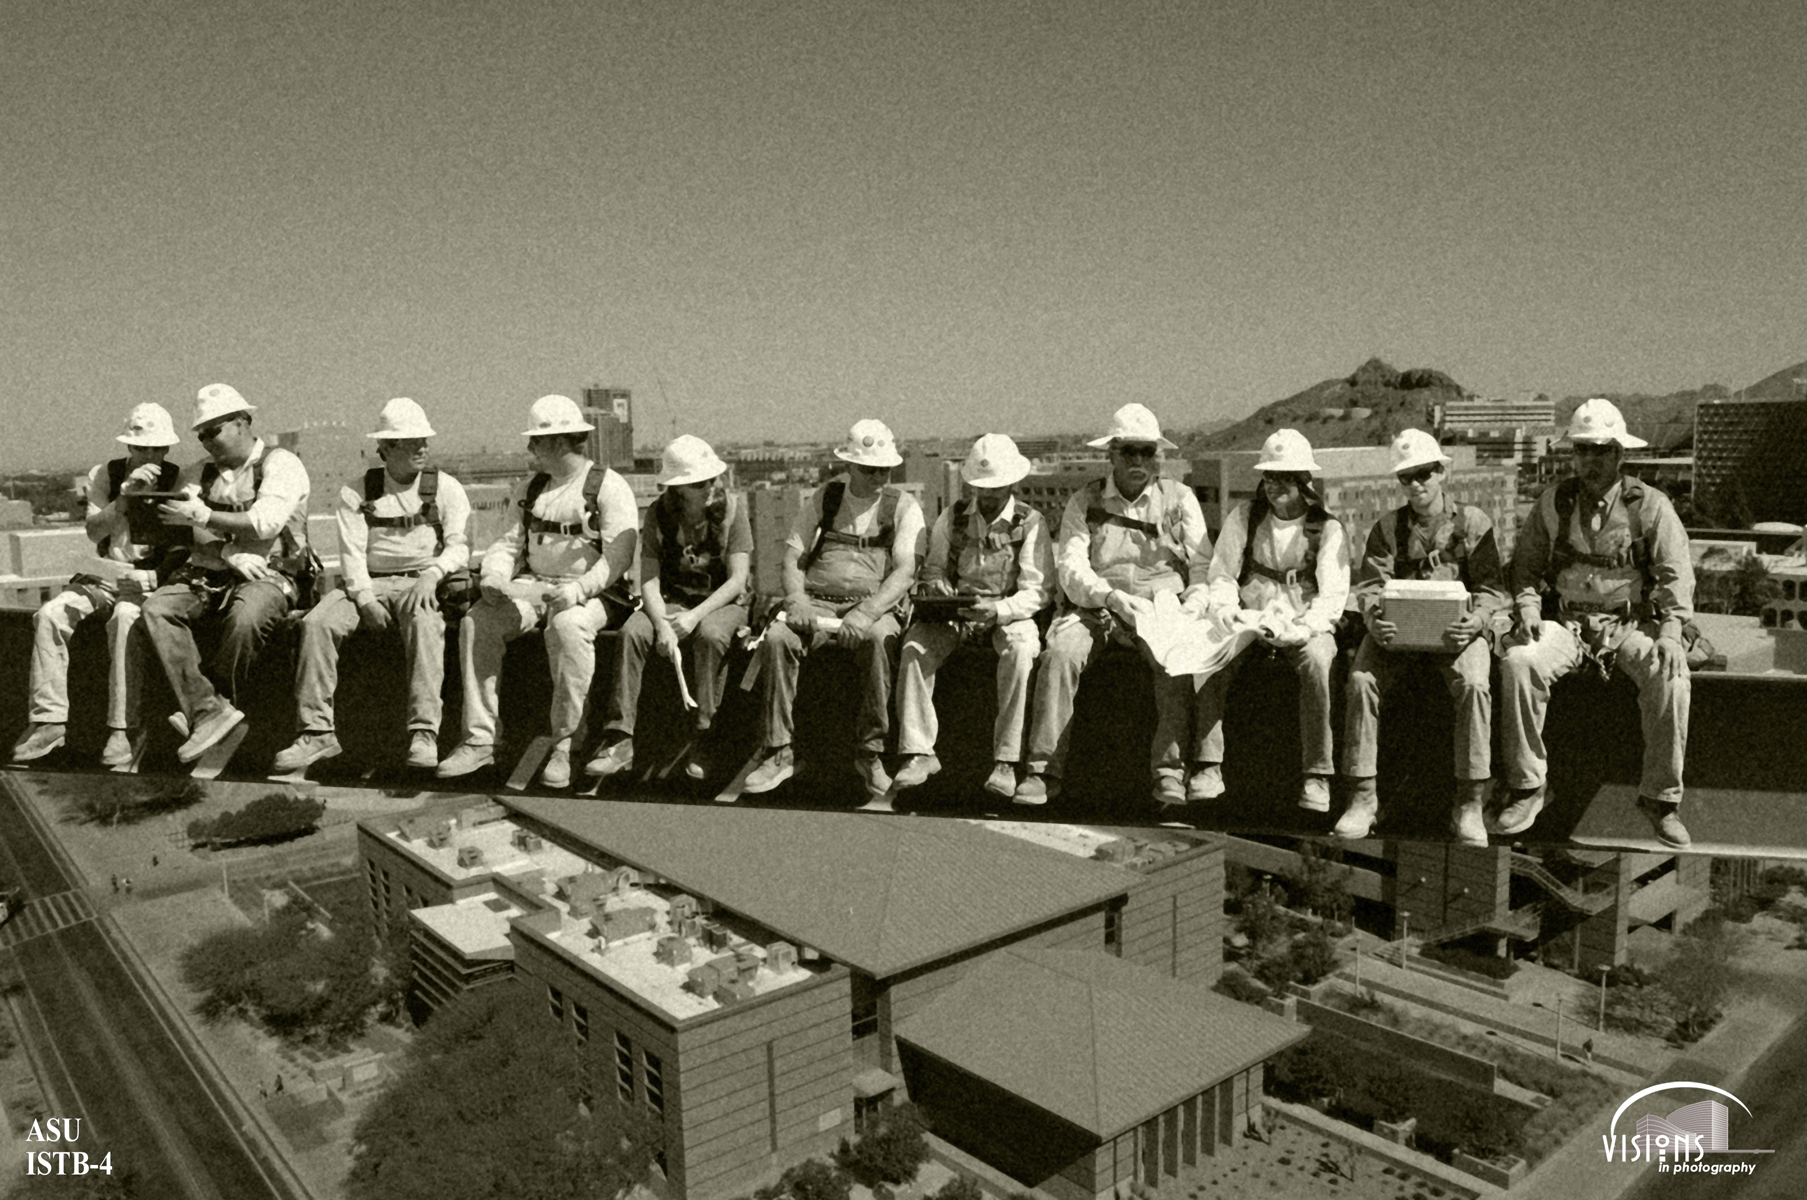 Sundt's recreation of "Lunch Atop a Skyscraper"